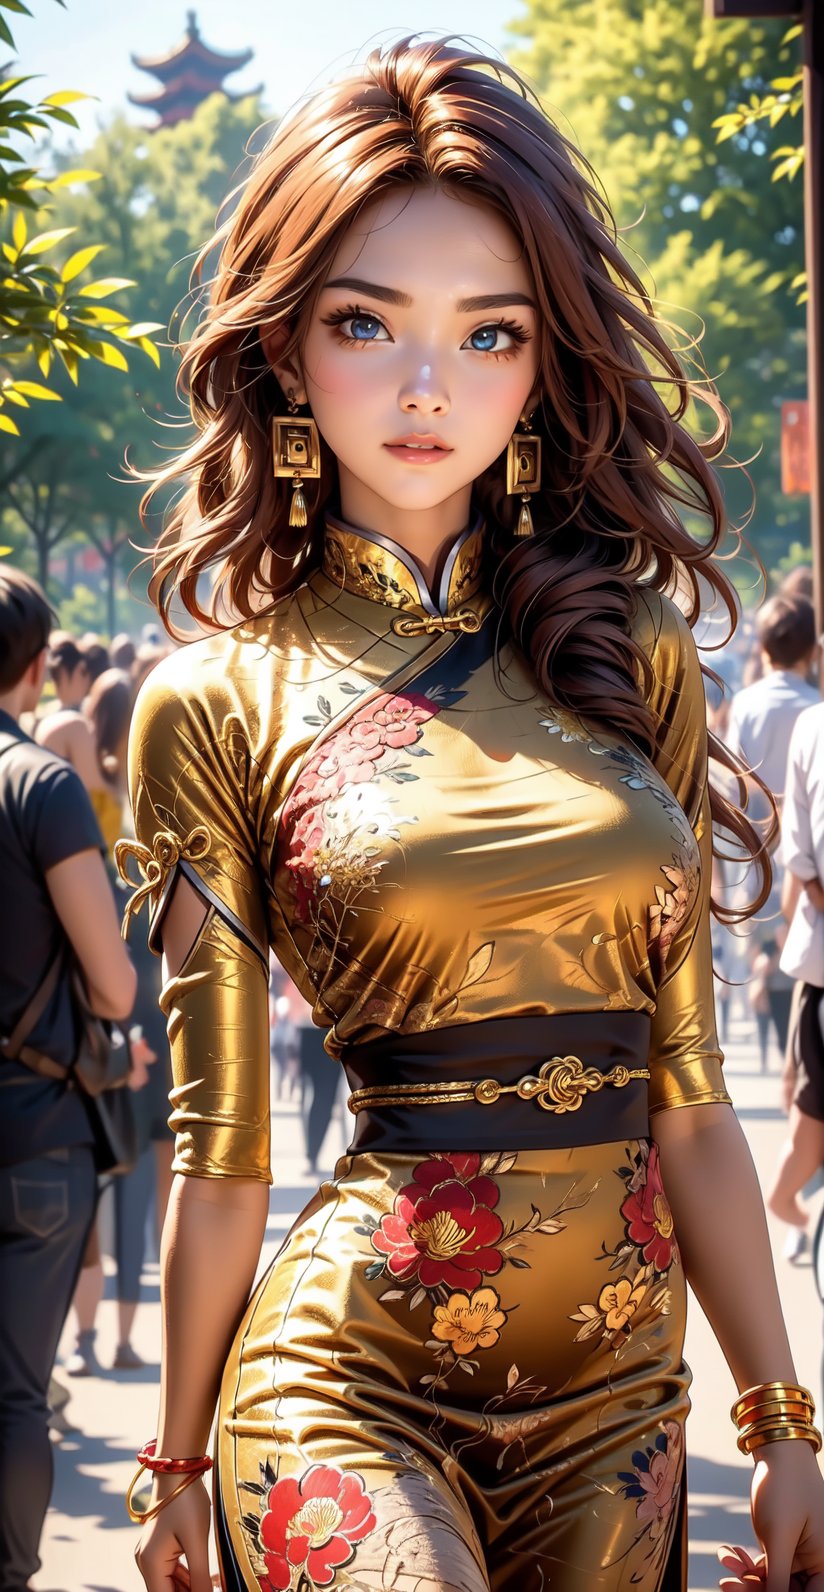 A 25 years old woman in the park, cowboy_shot, A sculptural woman with curly red hair walks through the park in a form-fitting Chinese dress adorned with intricate floral patterns and delicate embroidery. She wears traditional Chinese jewelry, including jade earrings and a golden bracelet, which glimmer in the sunlight. Her sweet smile and warm gaze complement her striking figure. The sun casts a gentle, golden light, creating a perfect composition that captures the essence of the moment, worthy of a prize-winning photograph
